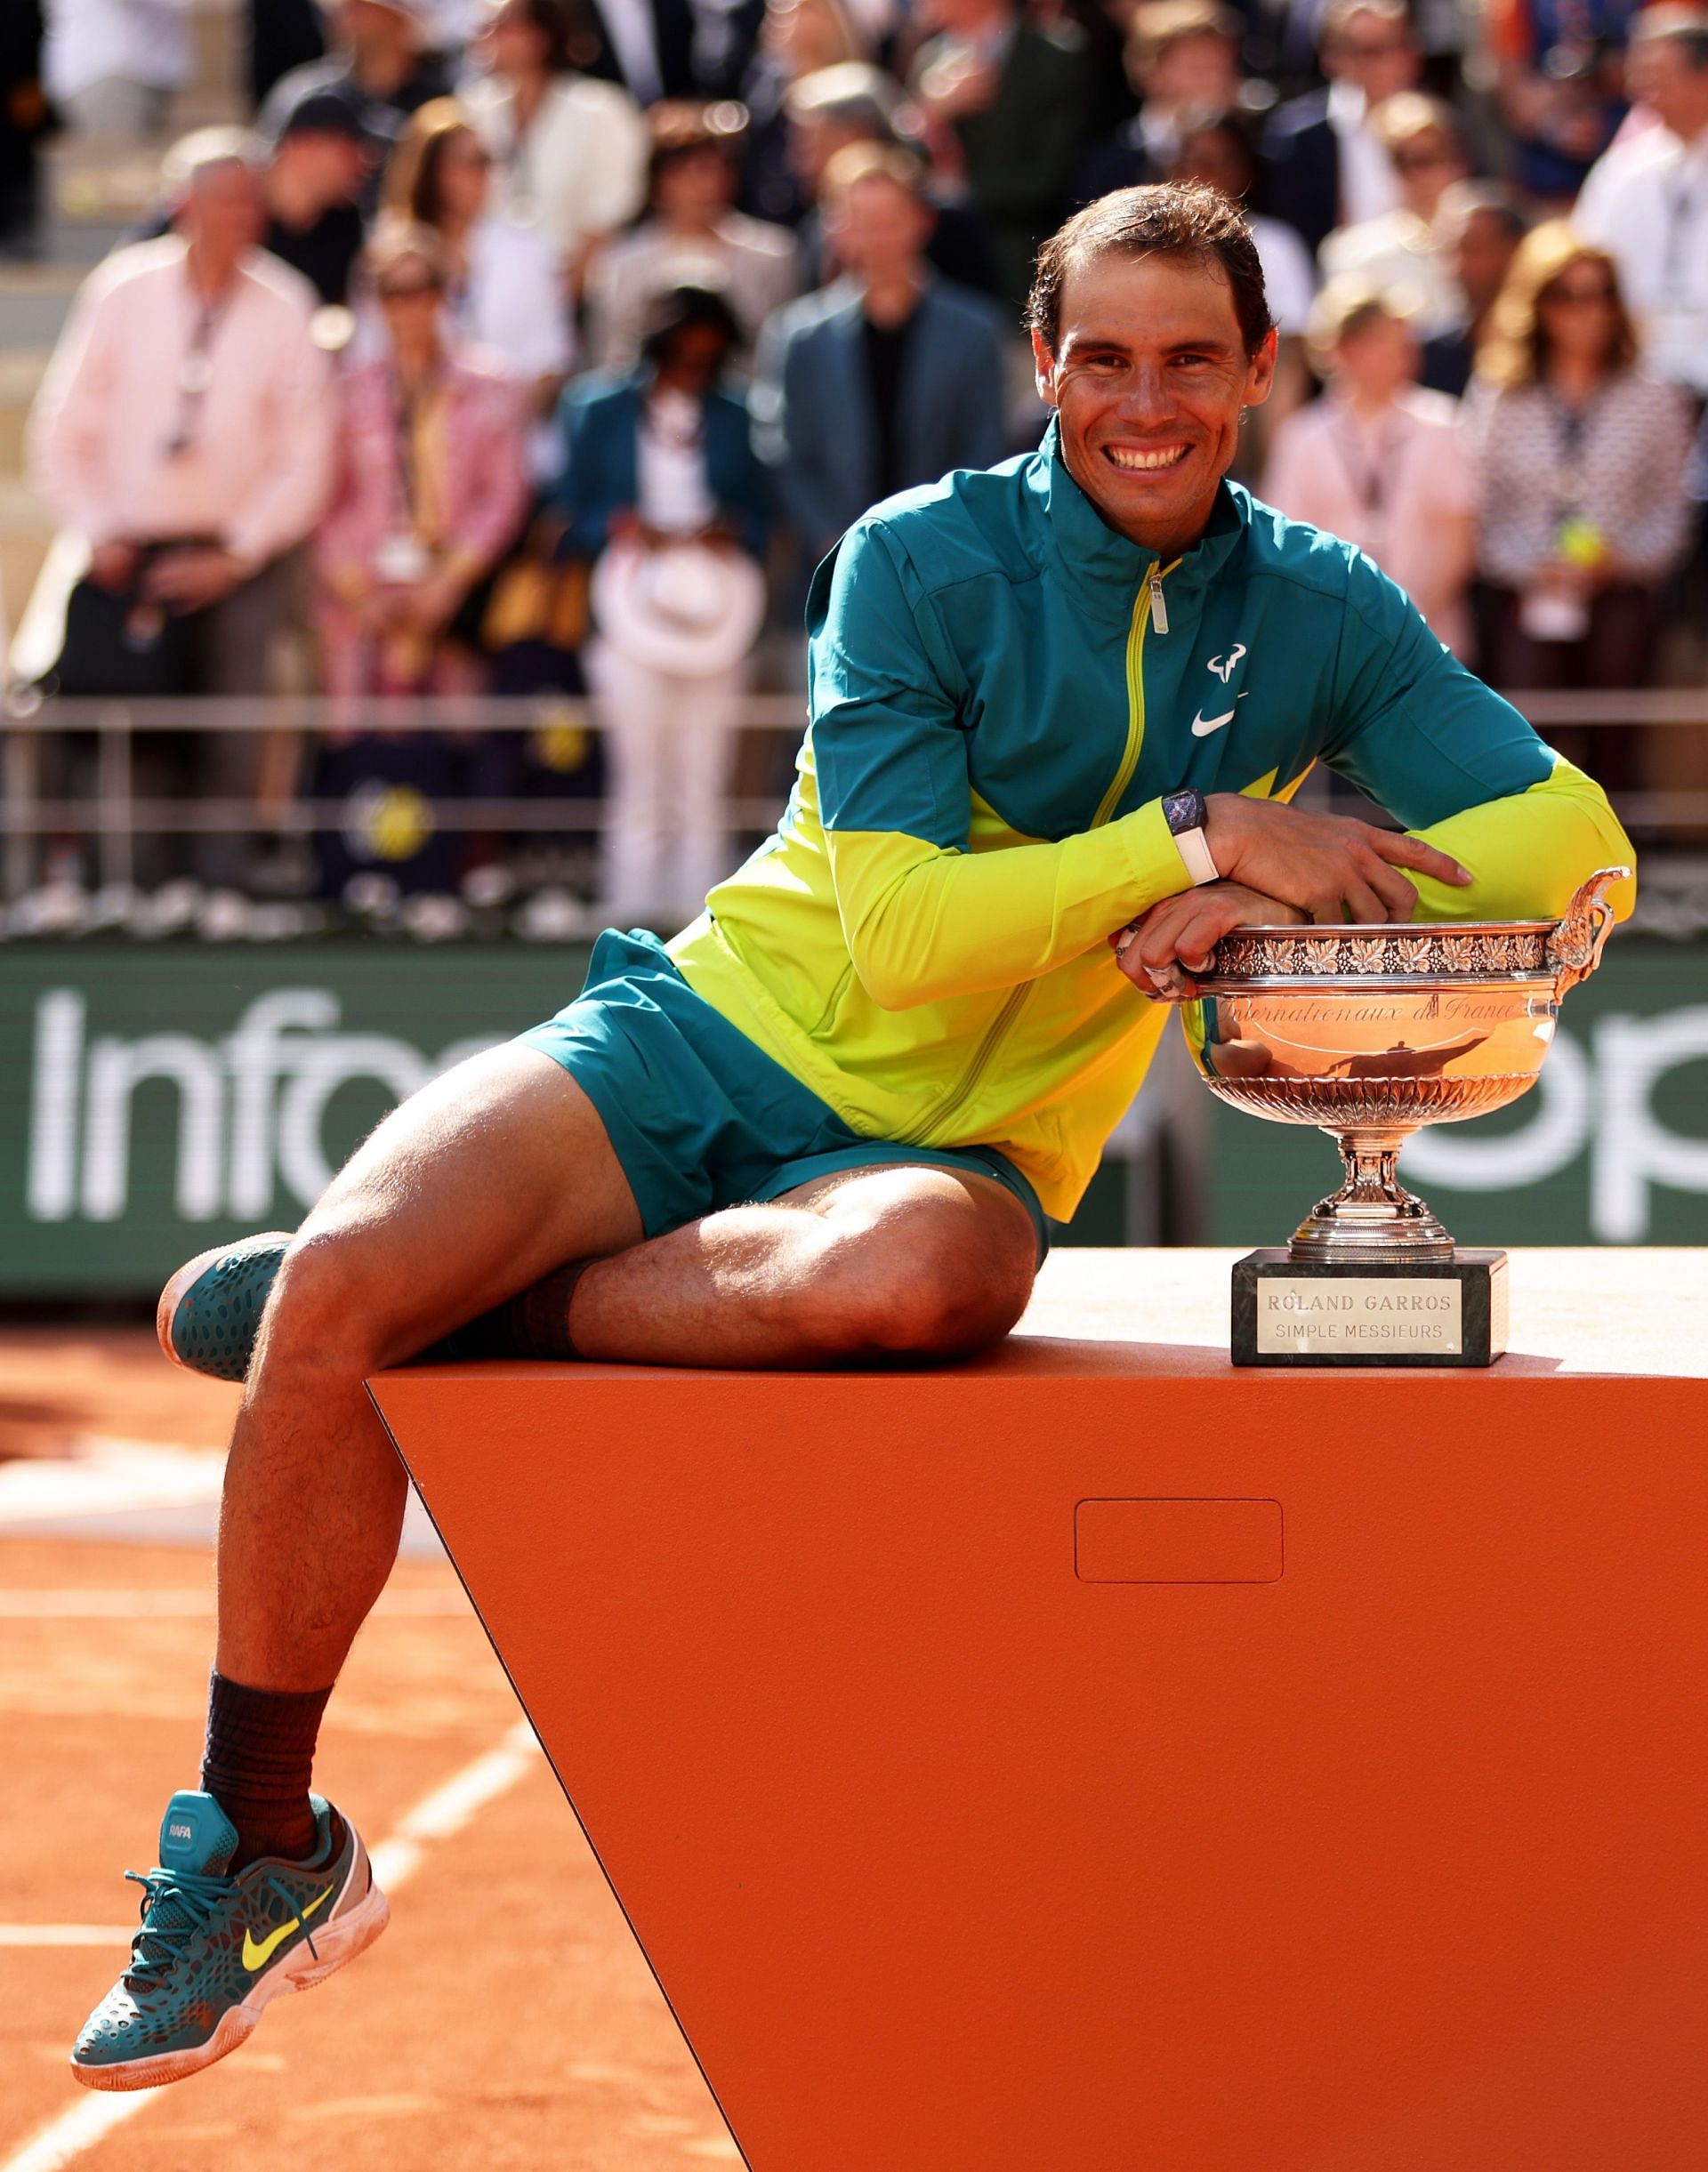 Rafael Nadal after winning the 2022 French Open title